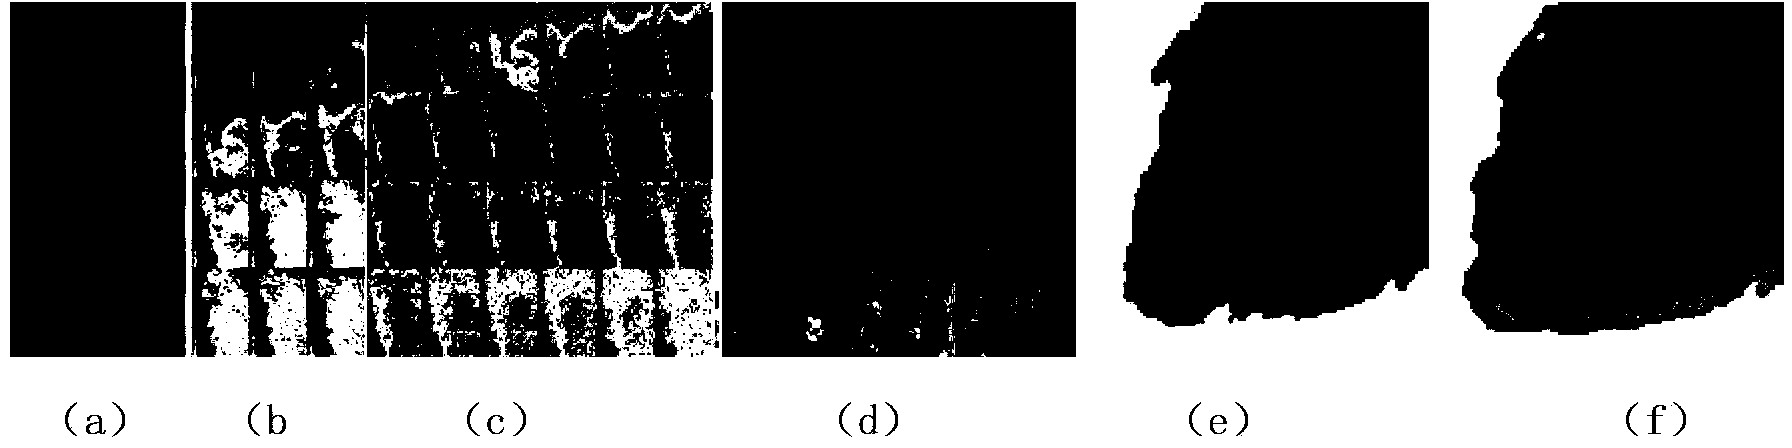 Method and device for measuring or monitoring tissue or cell transmembrane potential changes